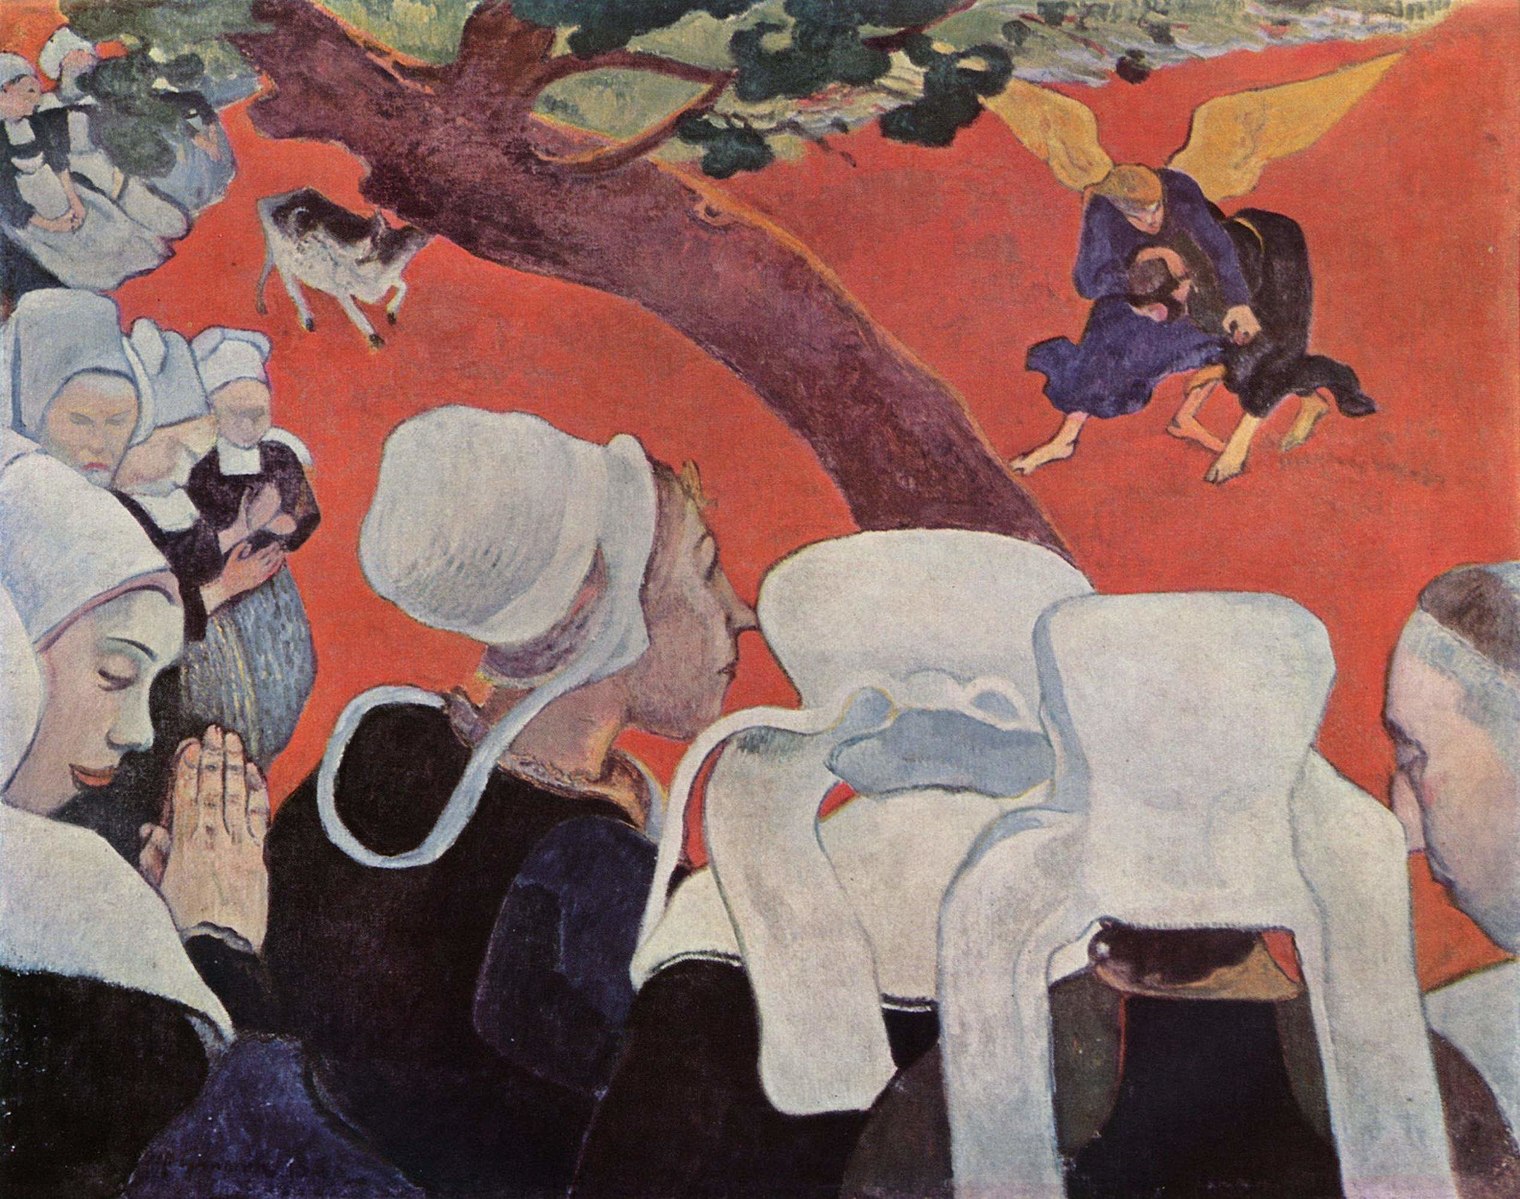 Several women wearing white caps on their heads watching a winged man wrestle another man